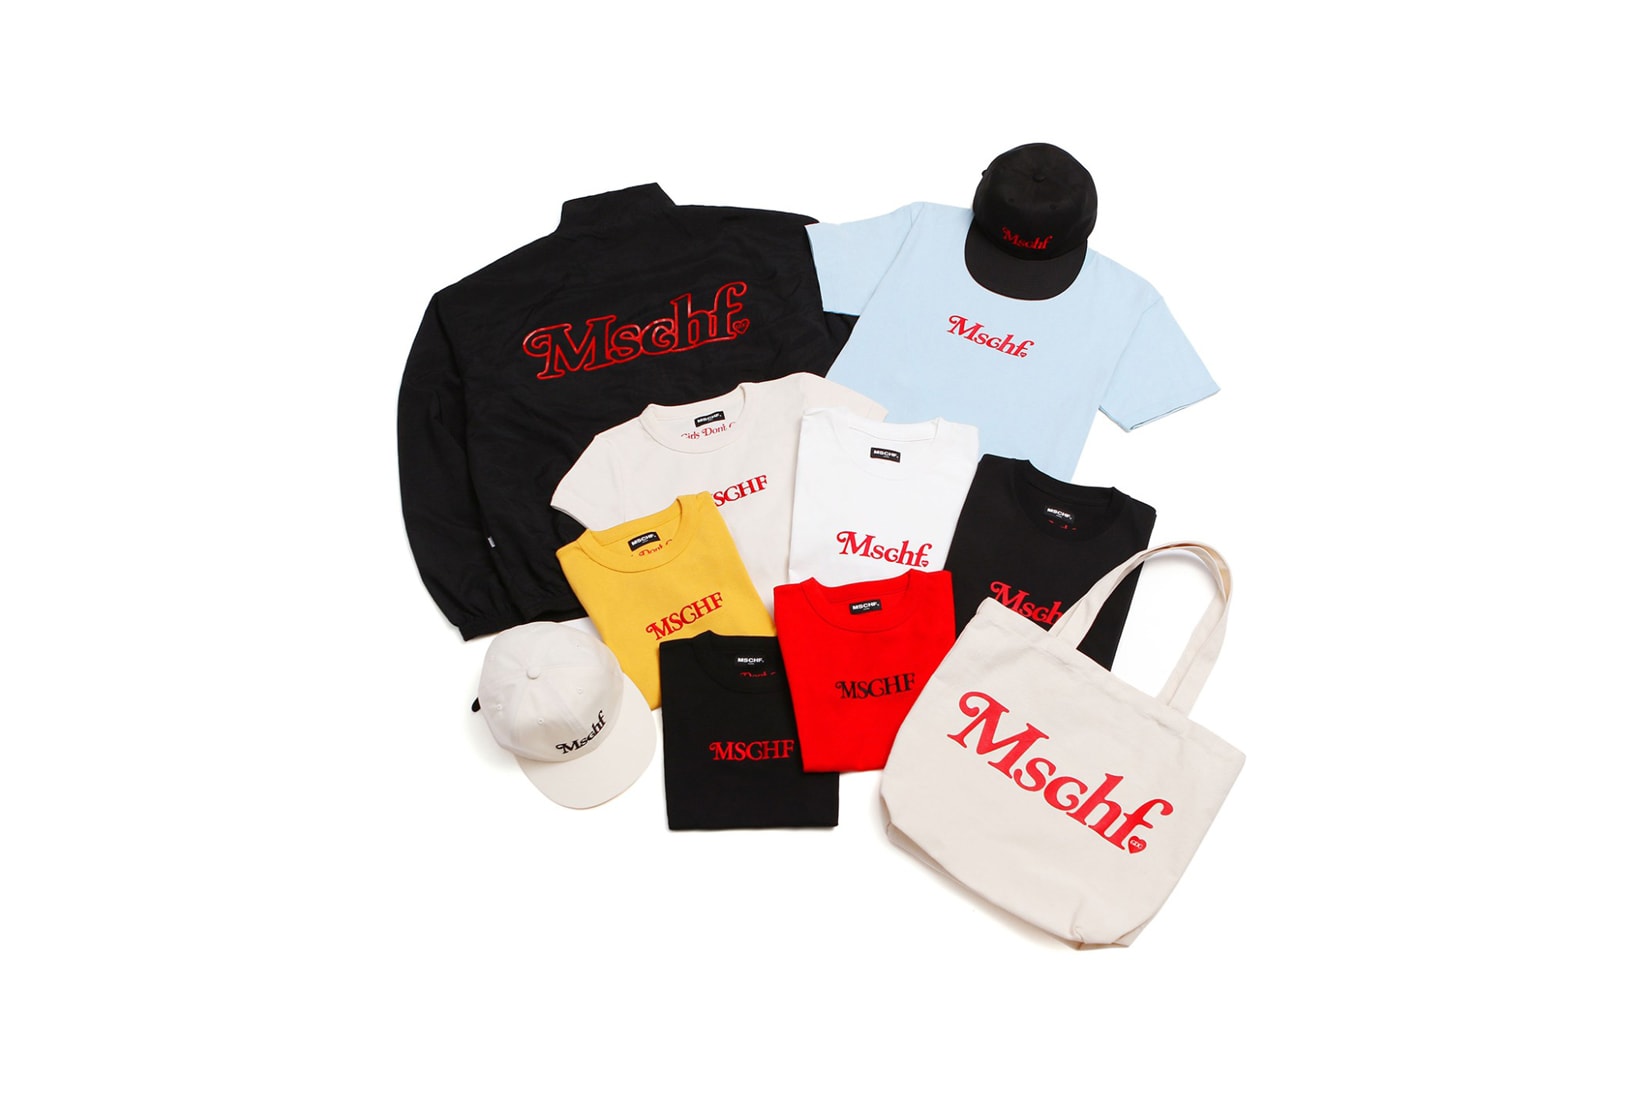 MISCHIEF Tokyo Pop-Up T-Shirts Windbreaker Jacket Tote Hats Black White Yellow Tan Blue Red